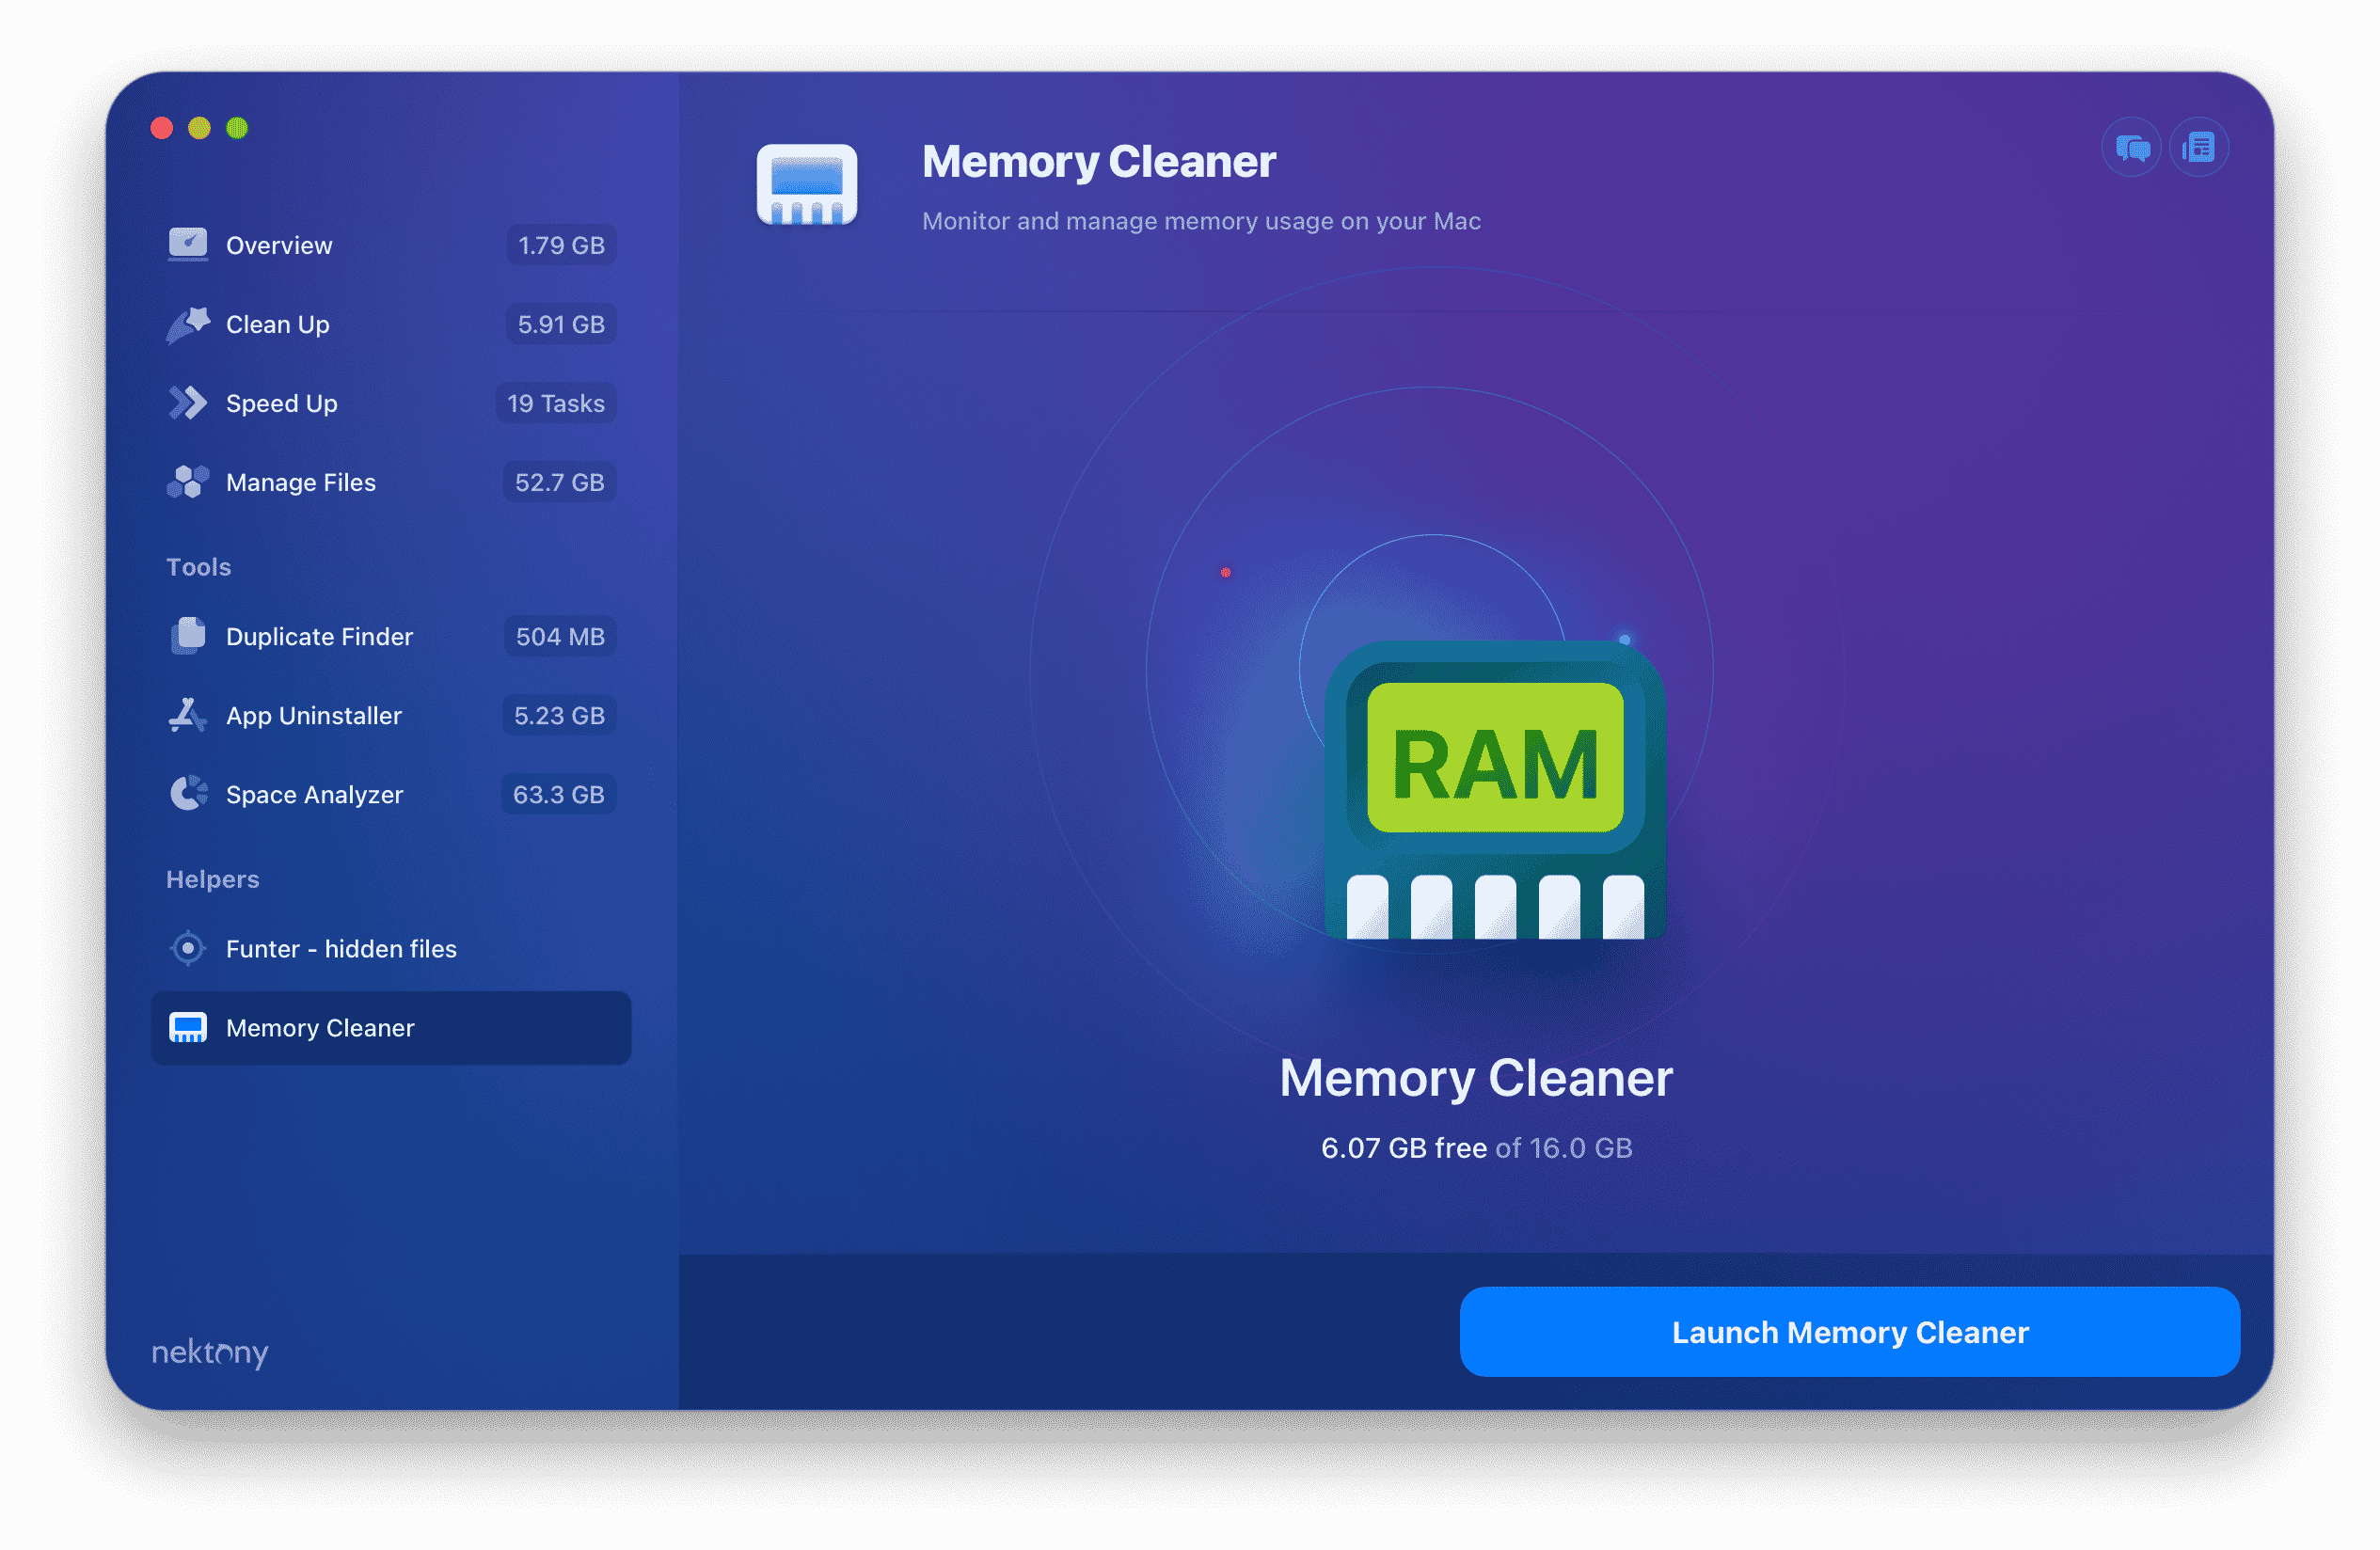 memory cleaner tool in maccleaner pro